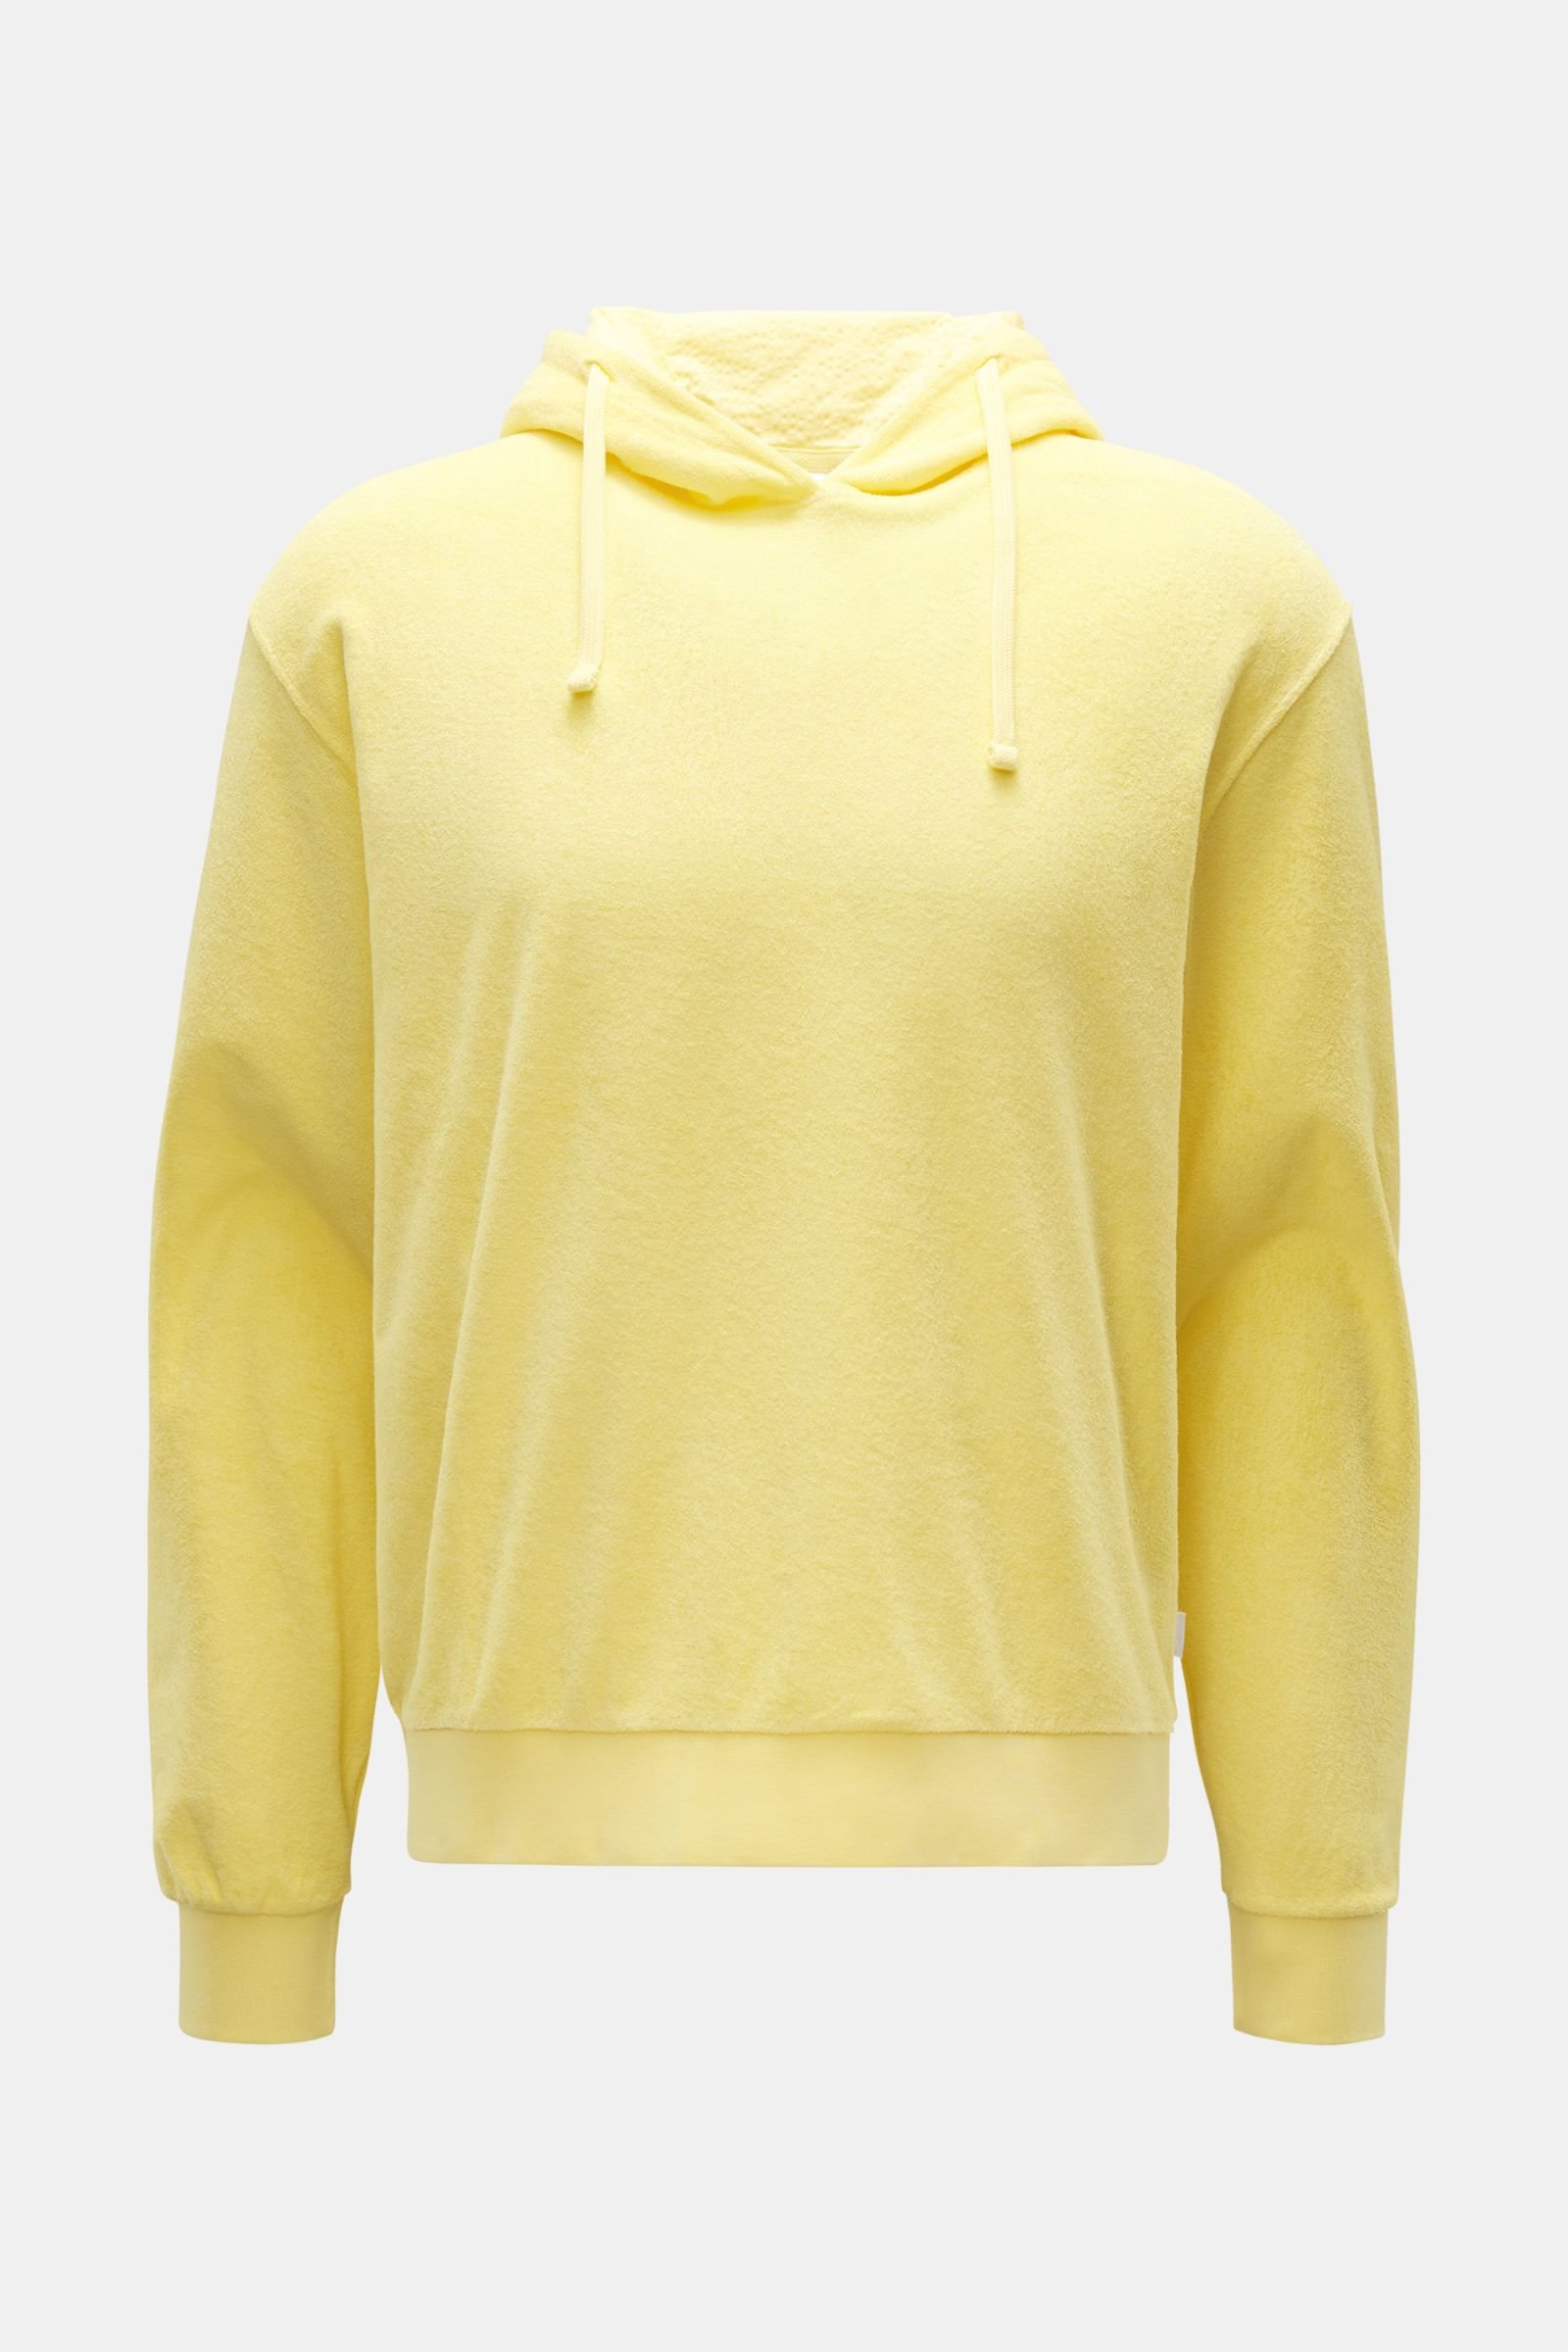 Terry hooded jumper 'Terry Hoody' yellow